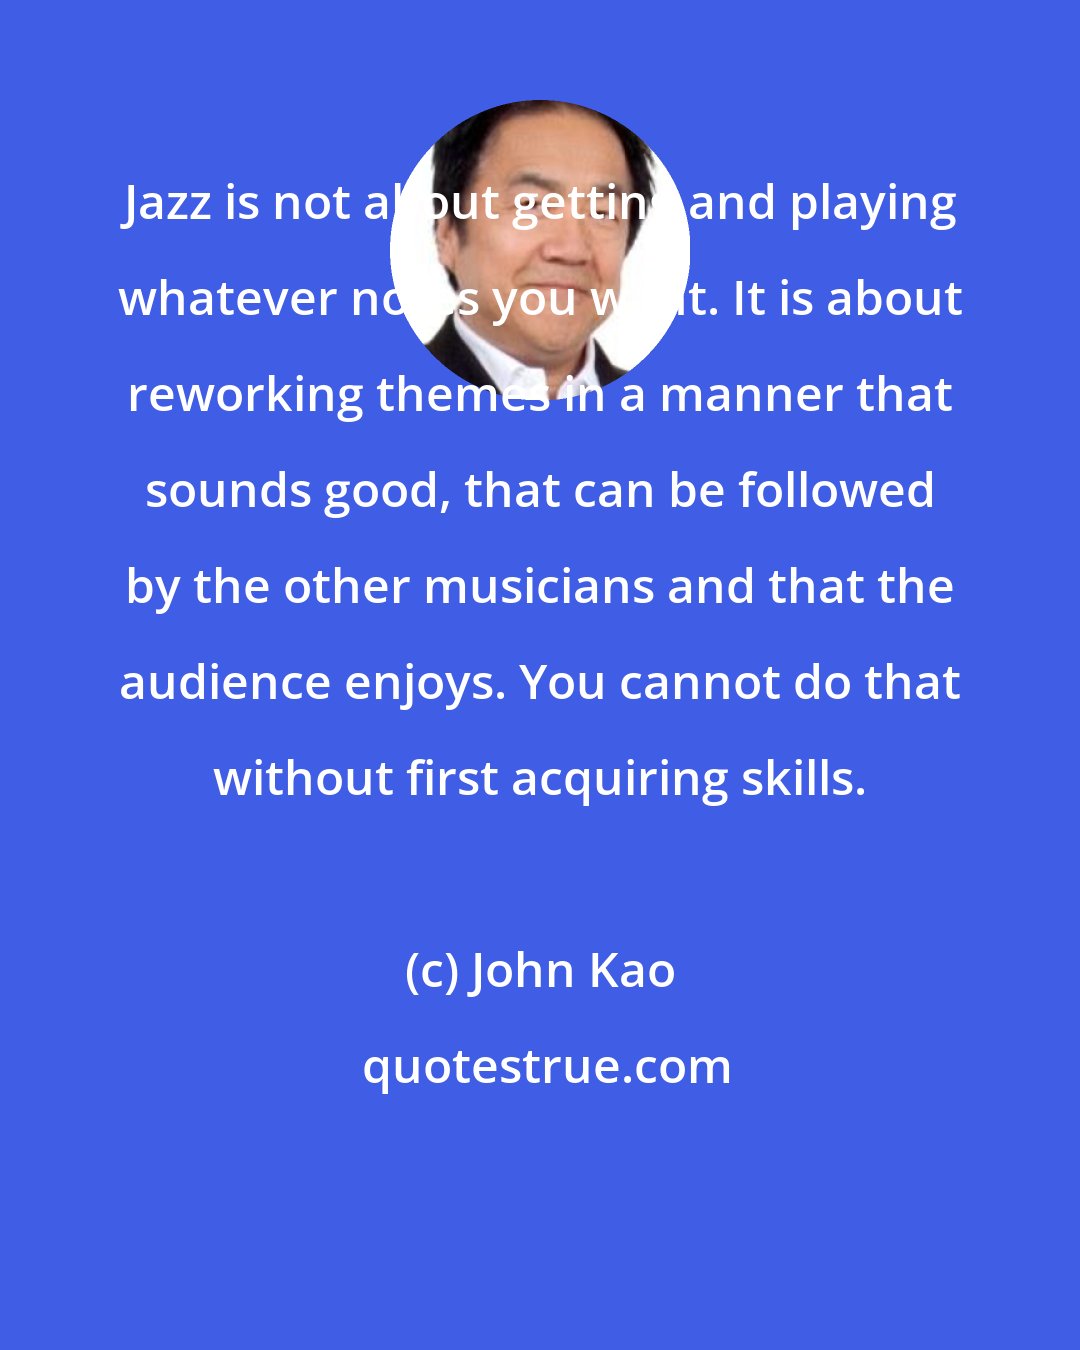 John Kao: Jazz is not about getting and playing whatever notes you want. It is about reworking themes in a manner that sounds good, that can be followed by the other musicians and that the audience enjoys. You cannot do that without first acquiring skills.